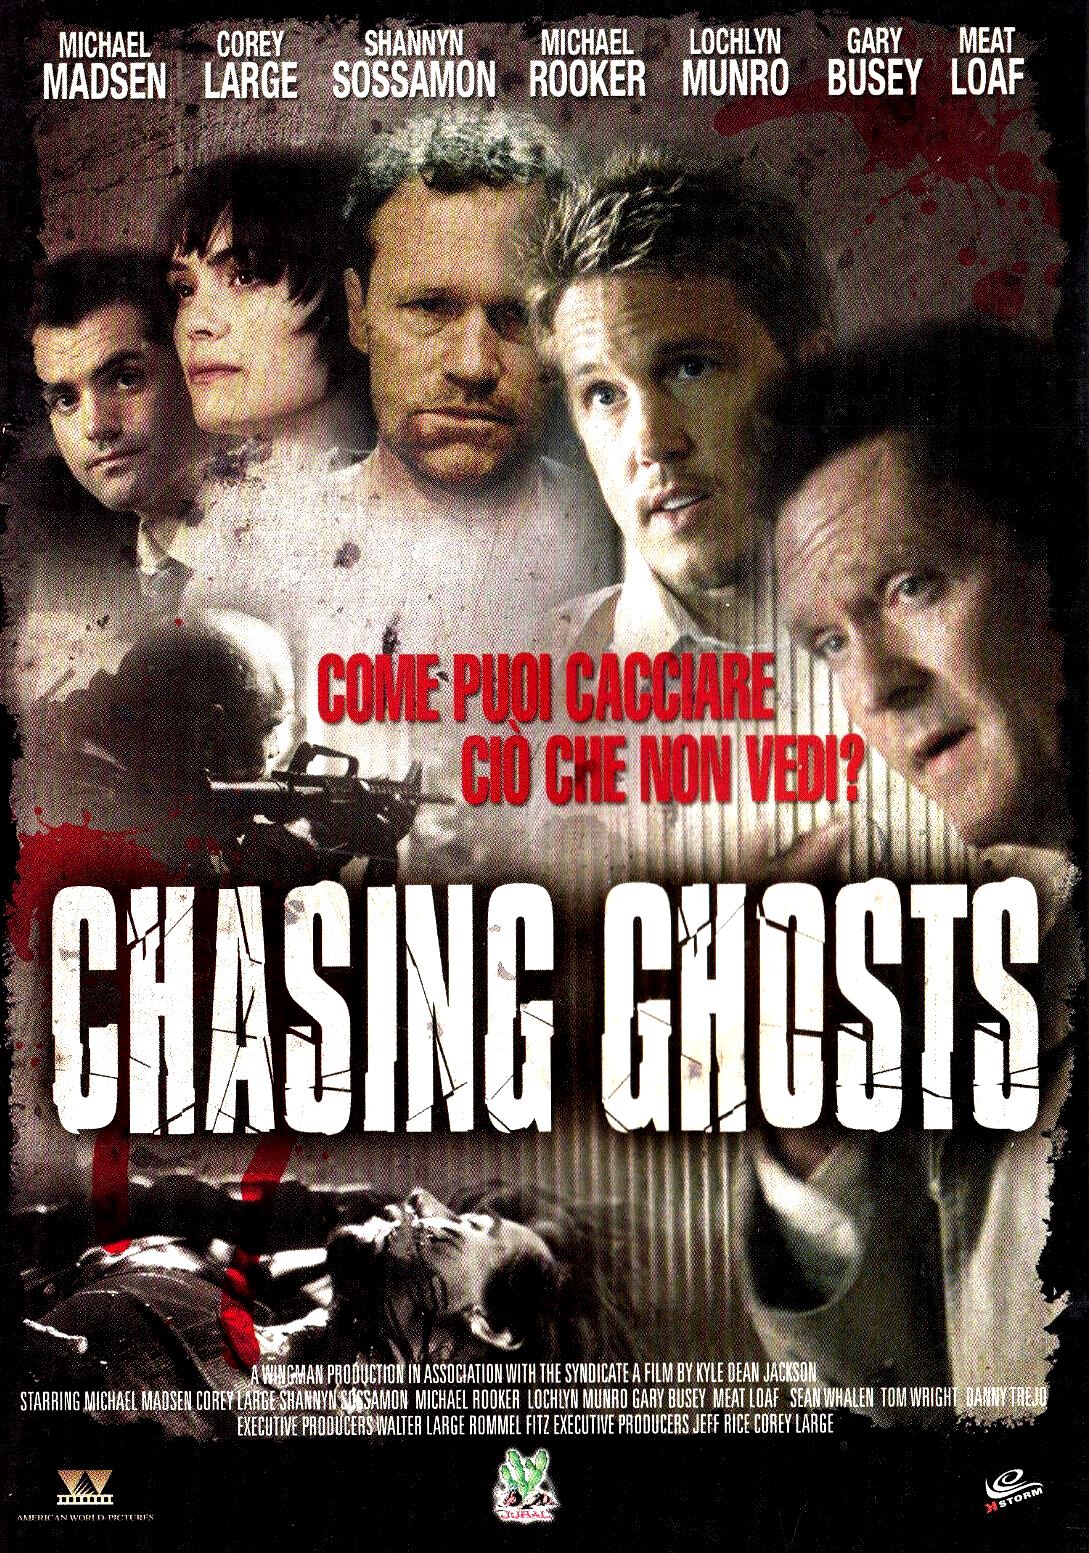 Chasing Ghost (2005)